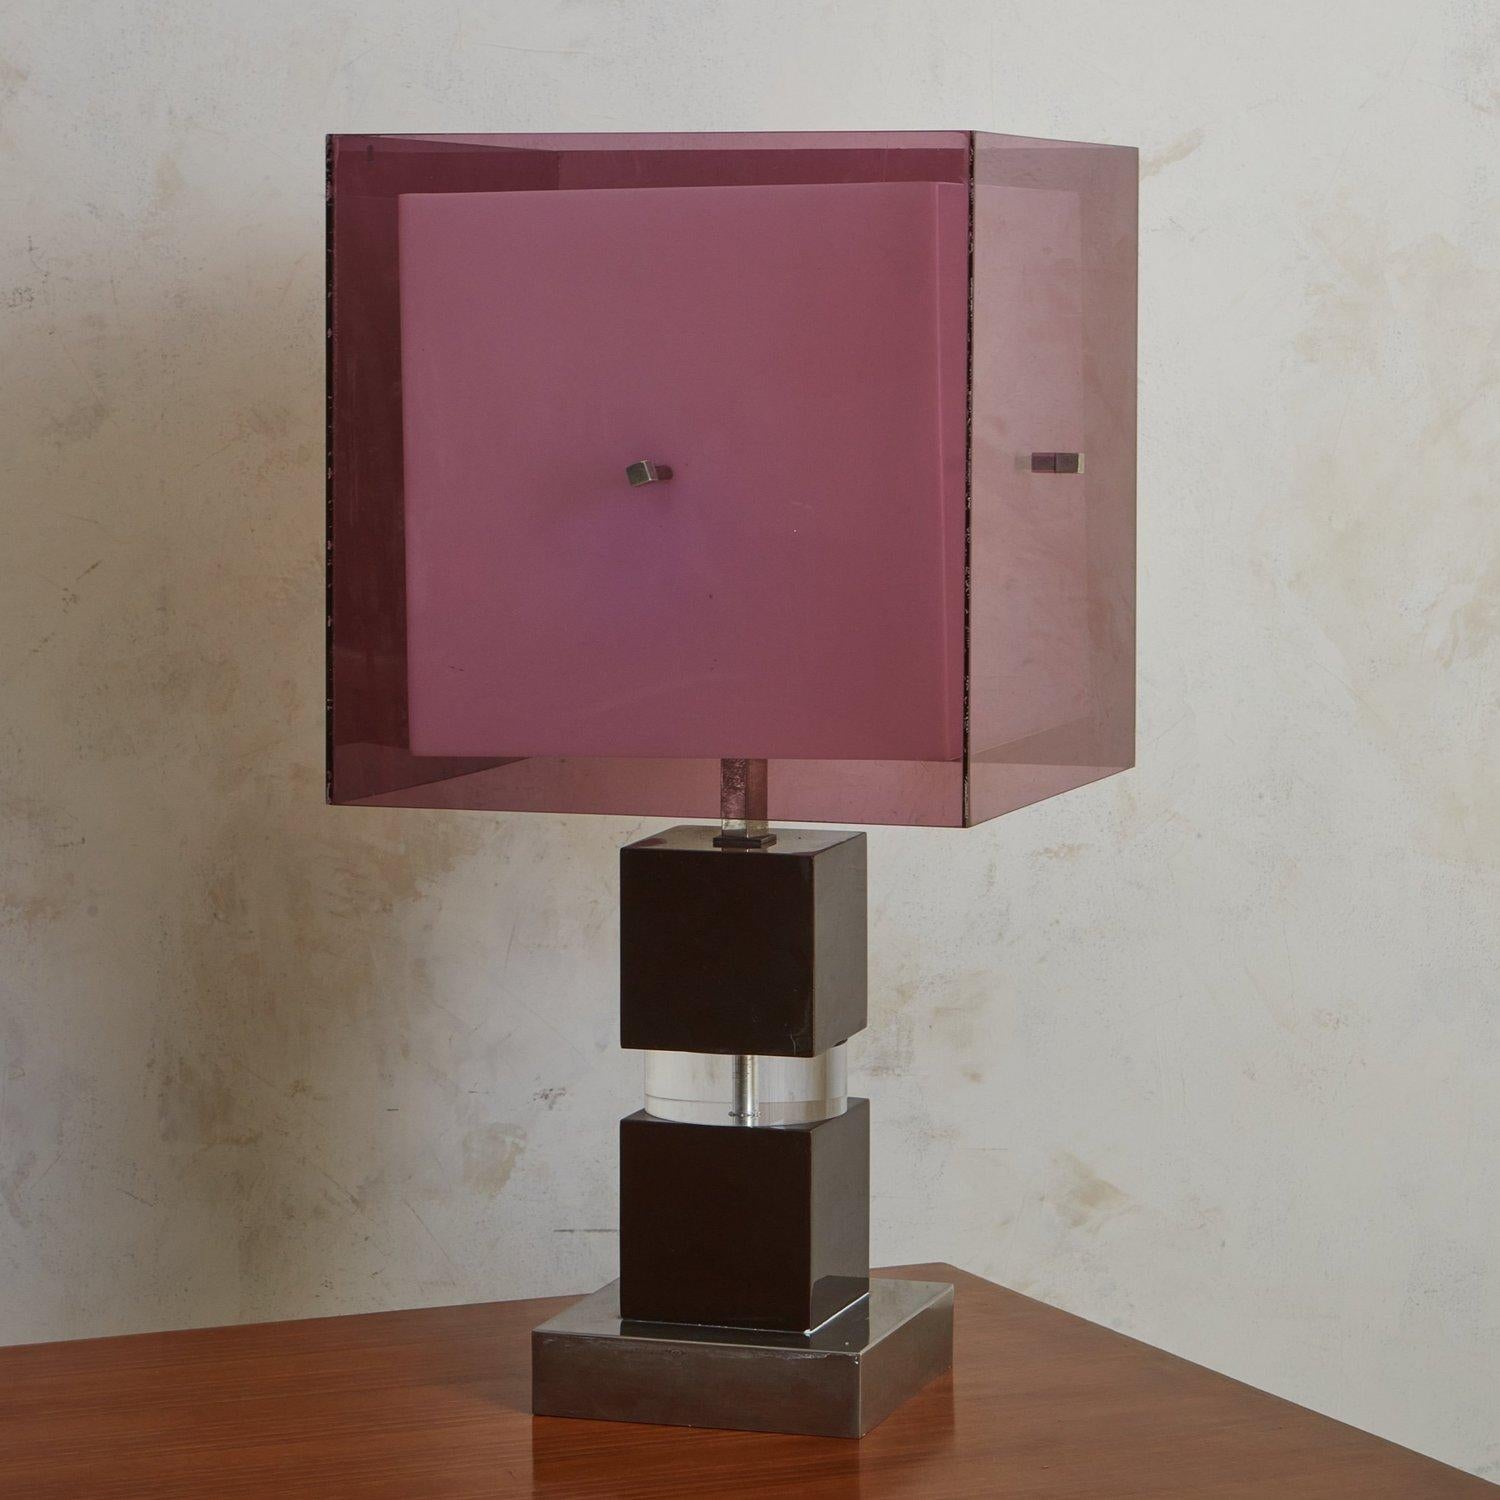 A 1970s Italian table lamp attributed to Romeo Rega. This lamp features a captivating purple lucite box shade with decorative metal cube hardware on each side. A smaller white acrylic shade floats within it. This lamp has a sculptural lucite +